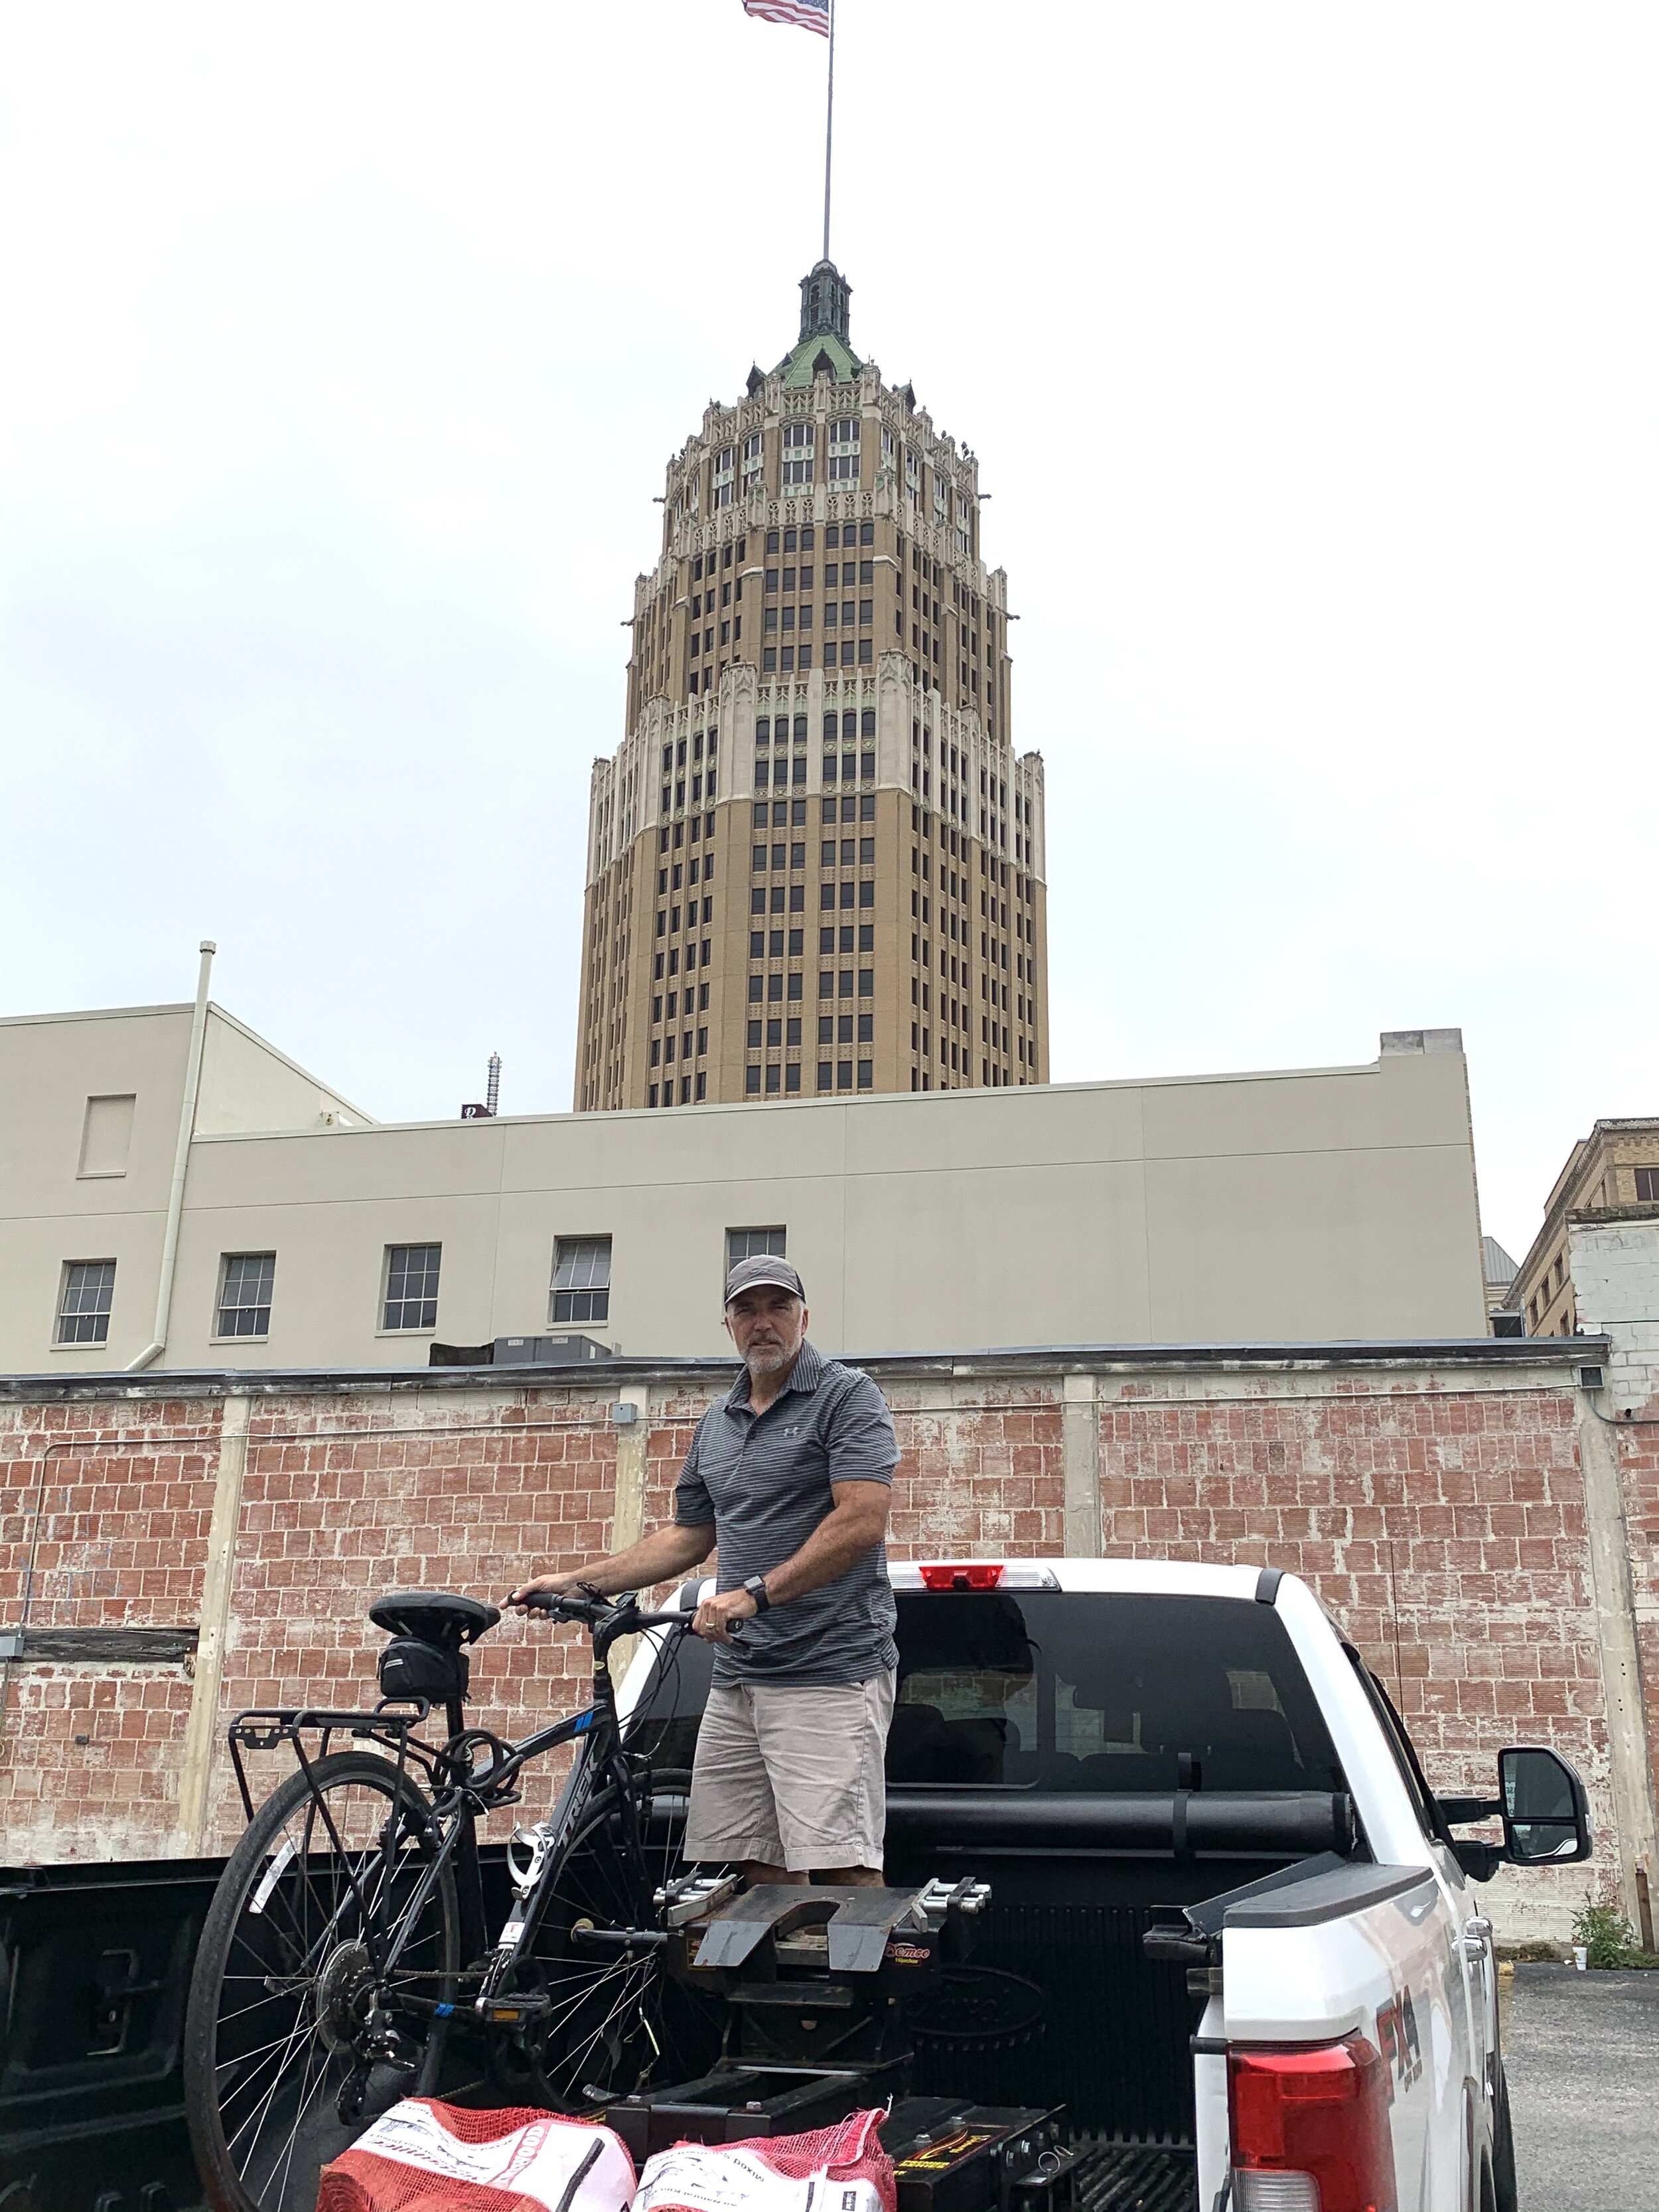  One day we toured San Antonio by bicycle. Pictured in the background is the Tower Life Building, built in 1929. The first six floors of the building housed the very first Sears &amp; Roebuck department store. 